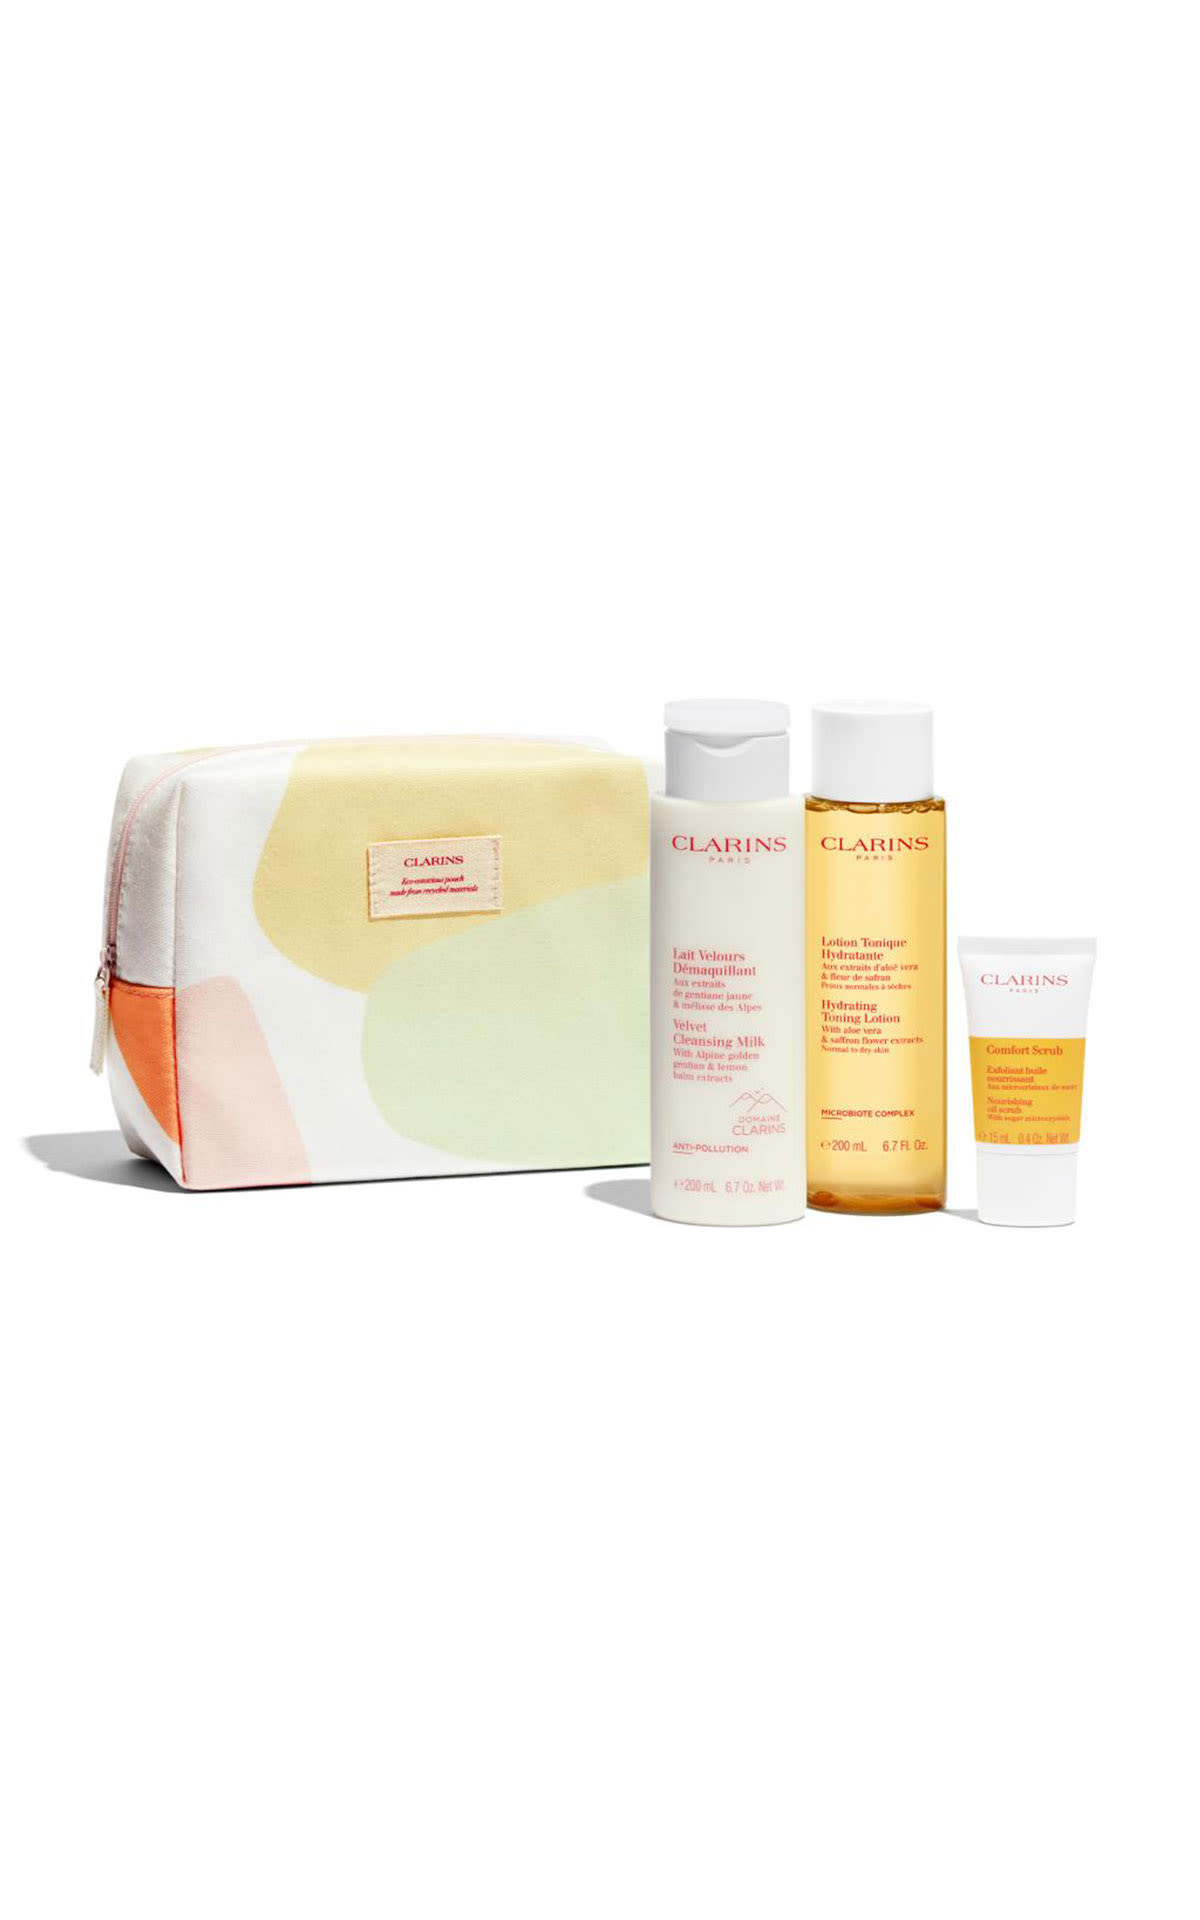 Clarins Cleansing essentials kit dry skin collection from Bicester Village